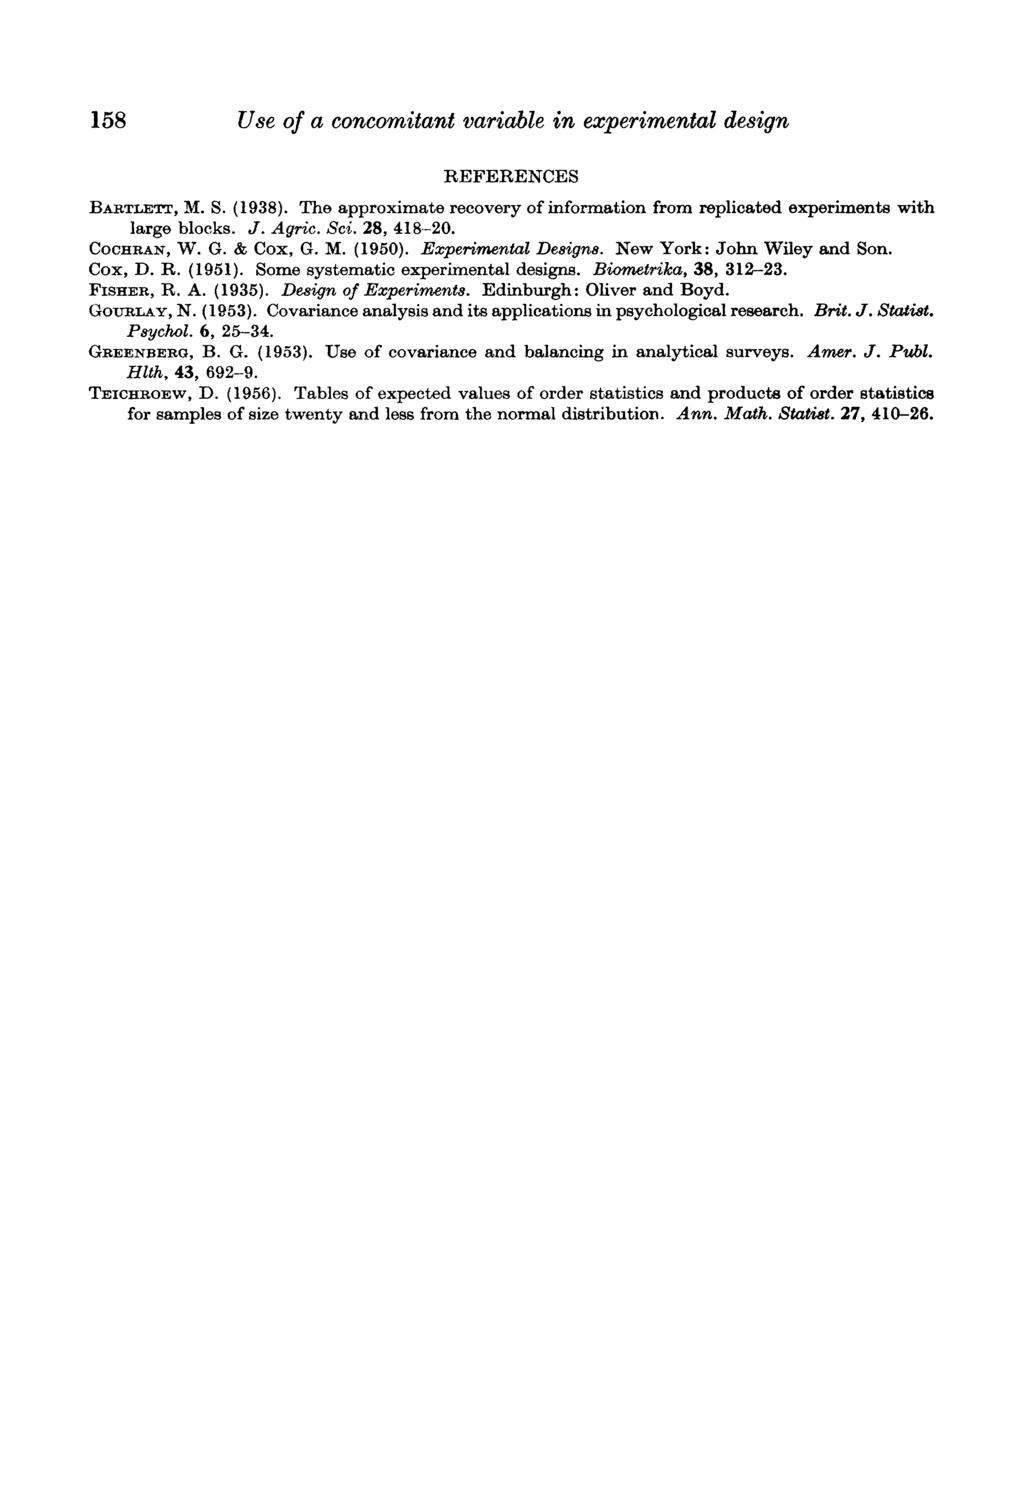 158 Use of a concomitant variable in experimental design REFERENCES BARTLEET, M. S. (1938). The approximate recovery of information from replicated experiments with large blocks. J. Agric. Sci.